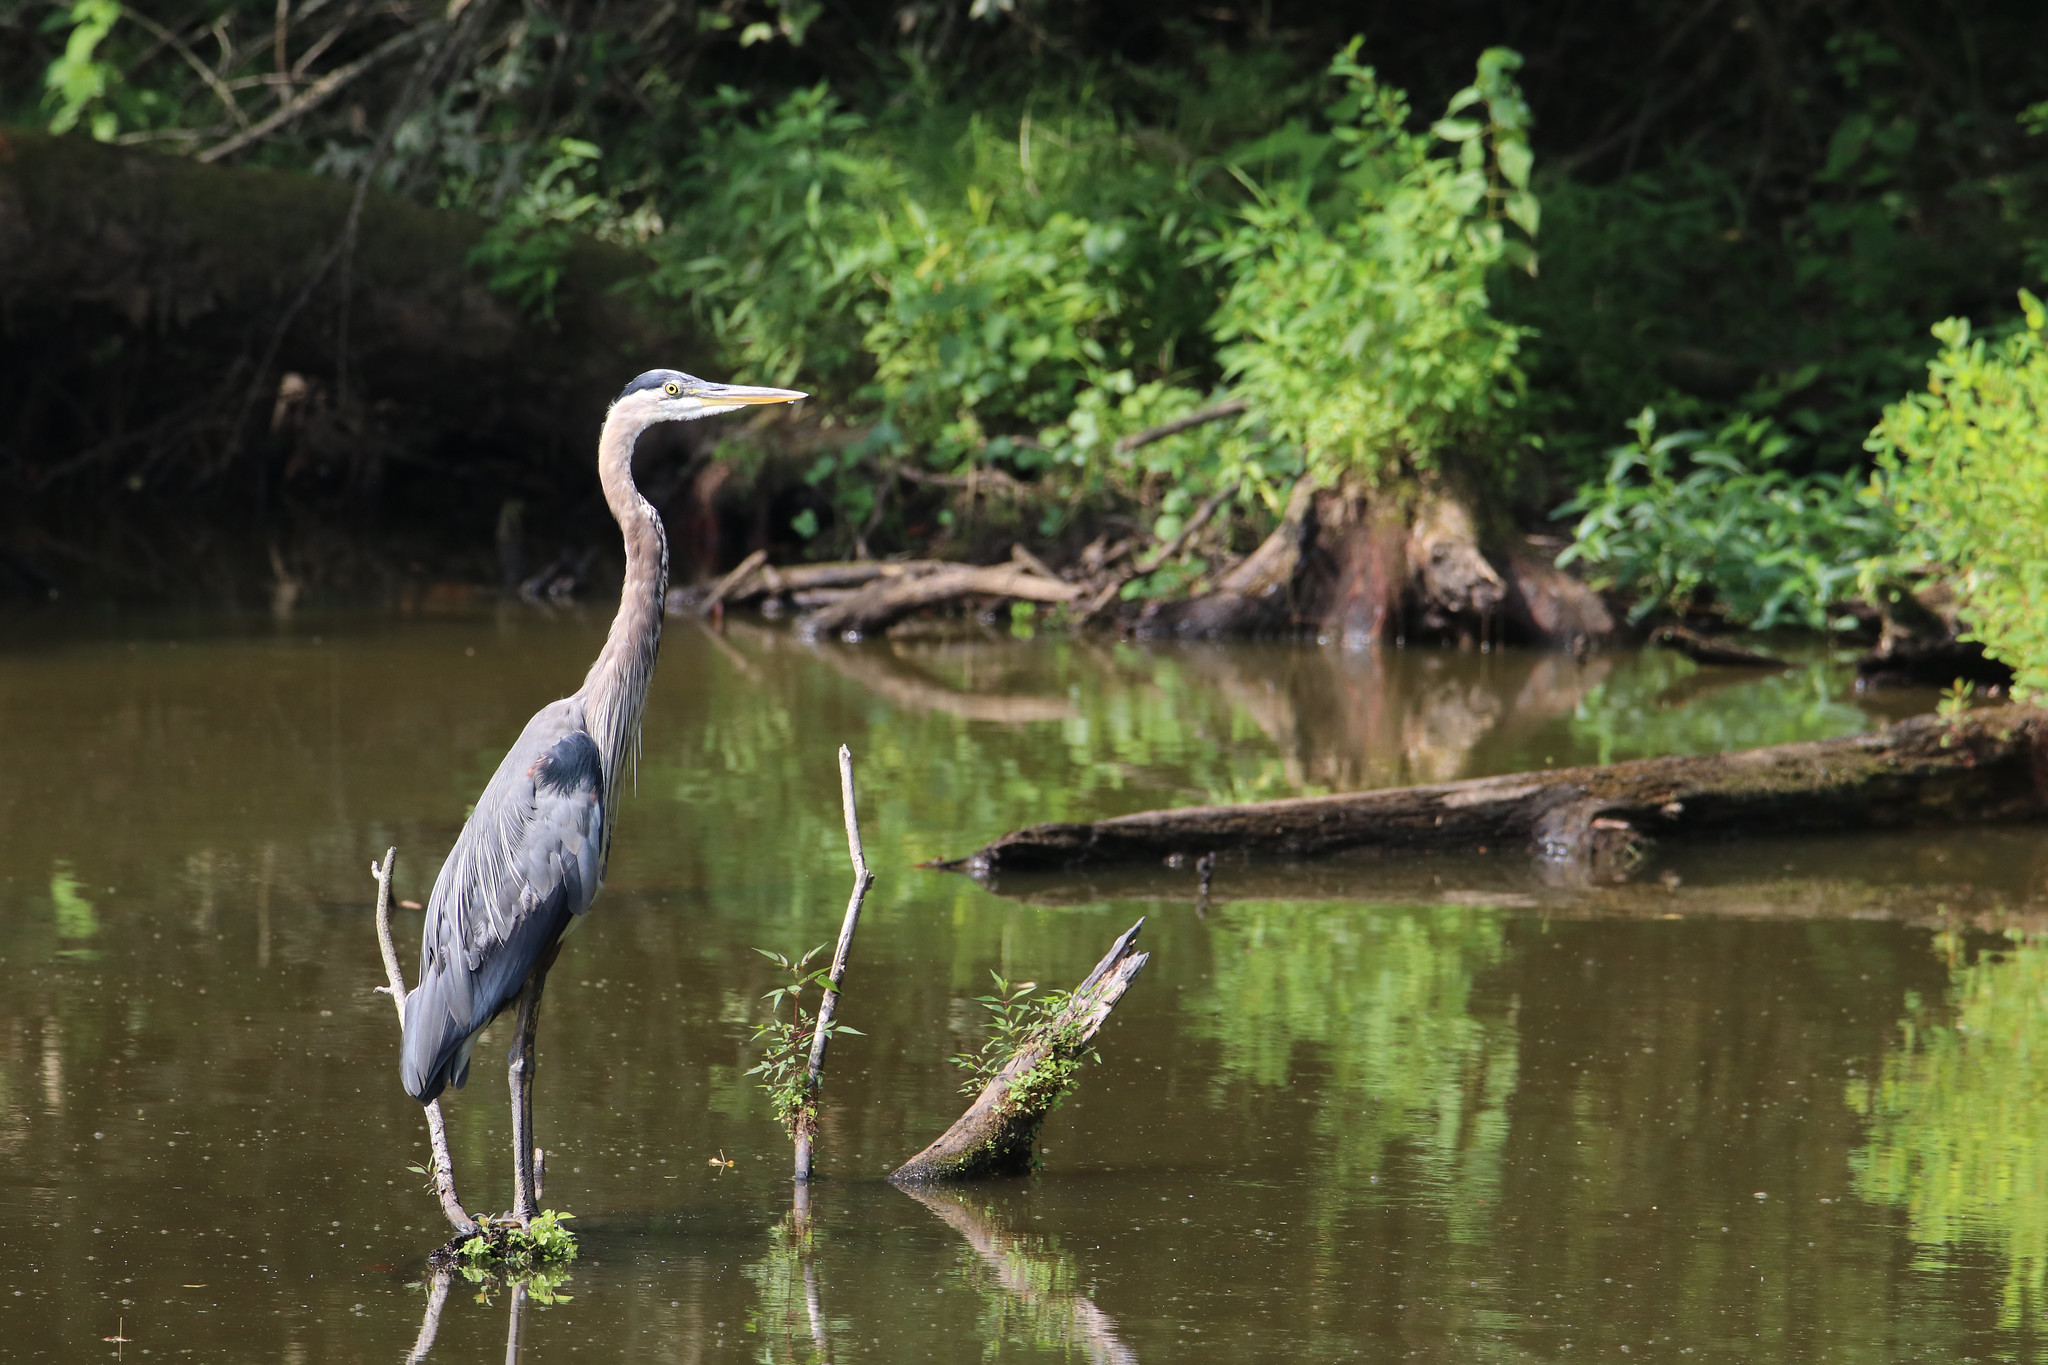 A Great Blue Heron stands in the Mingo River